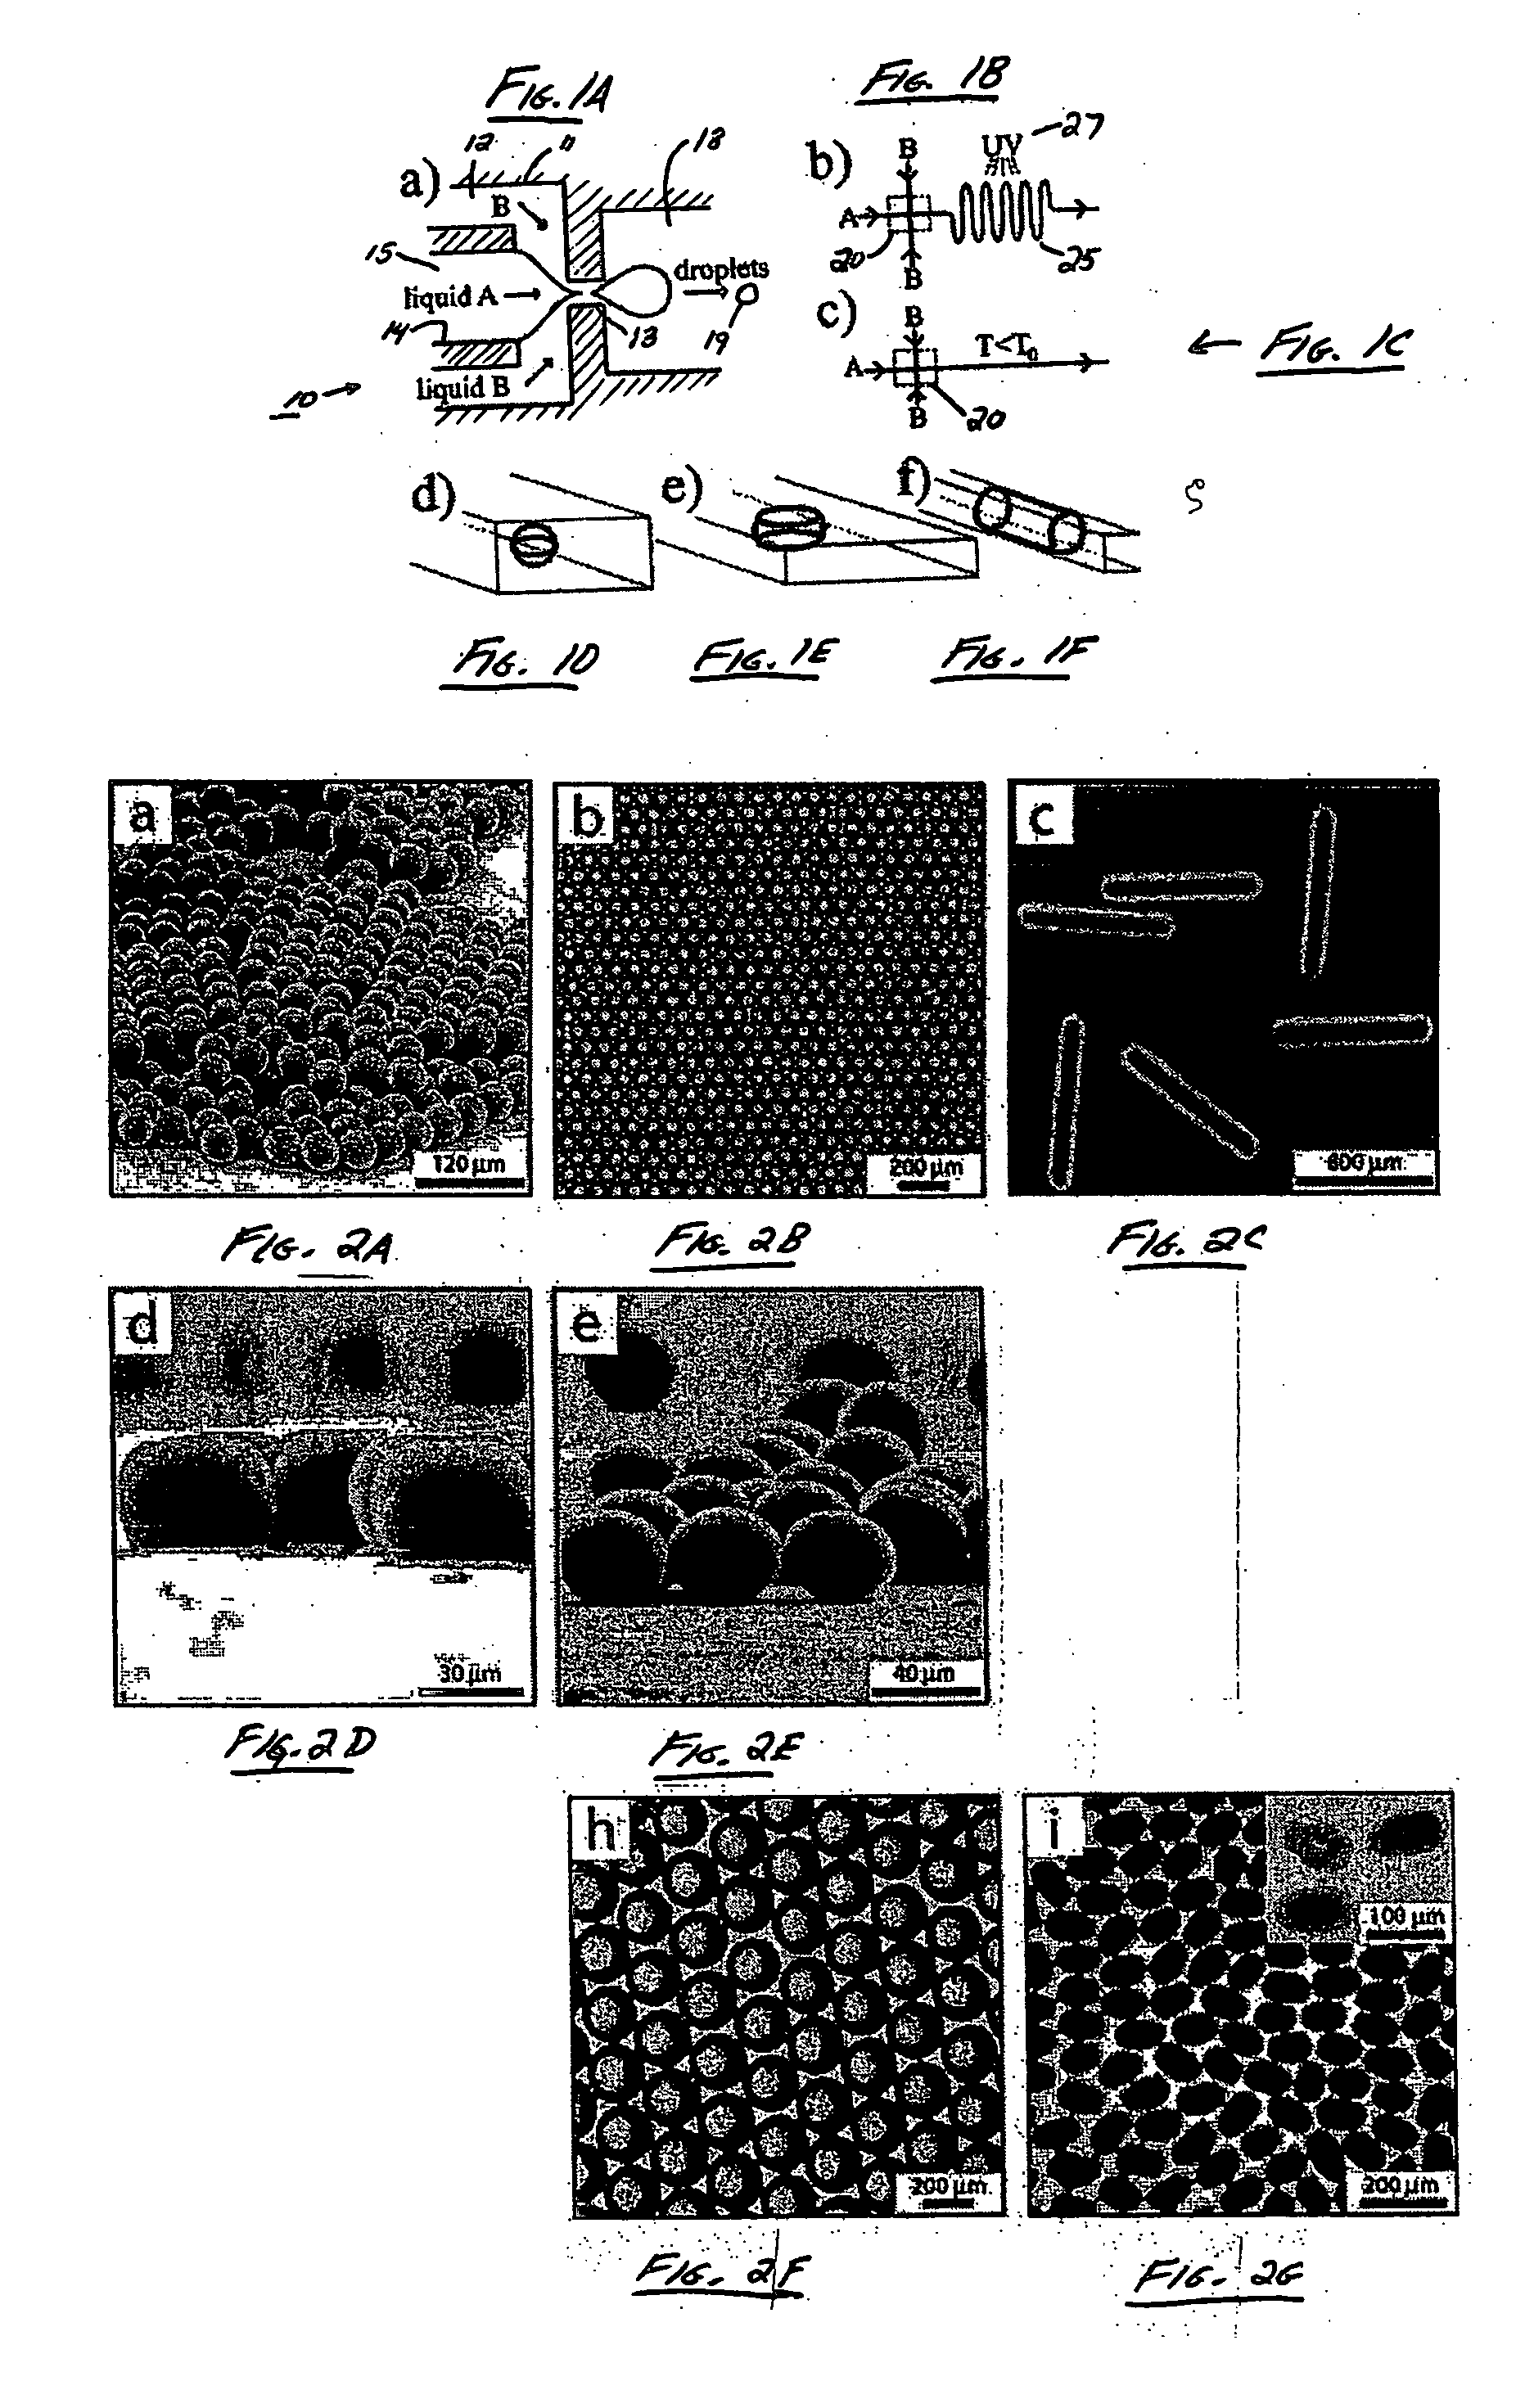 Systems and methods of forming particles